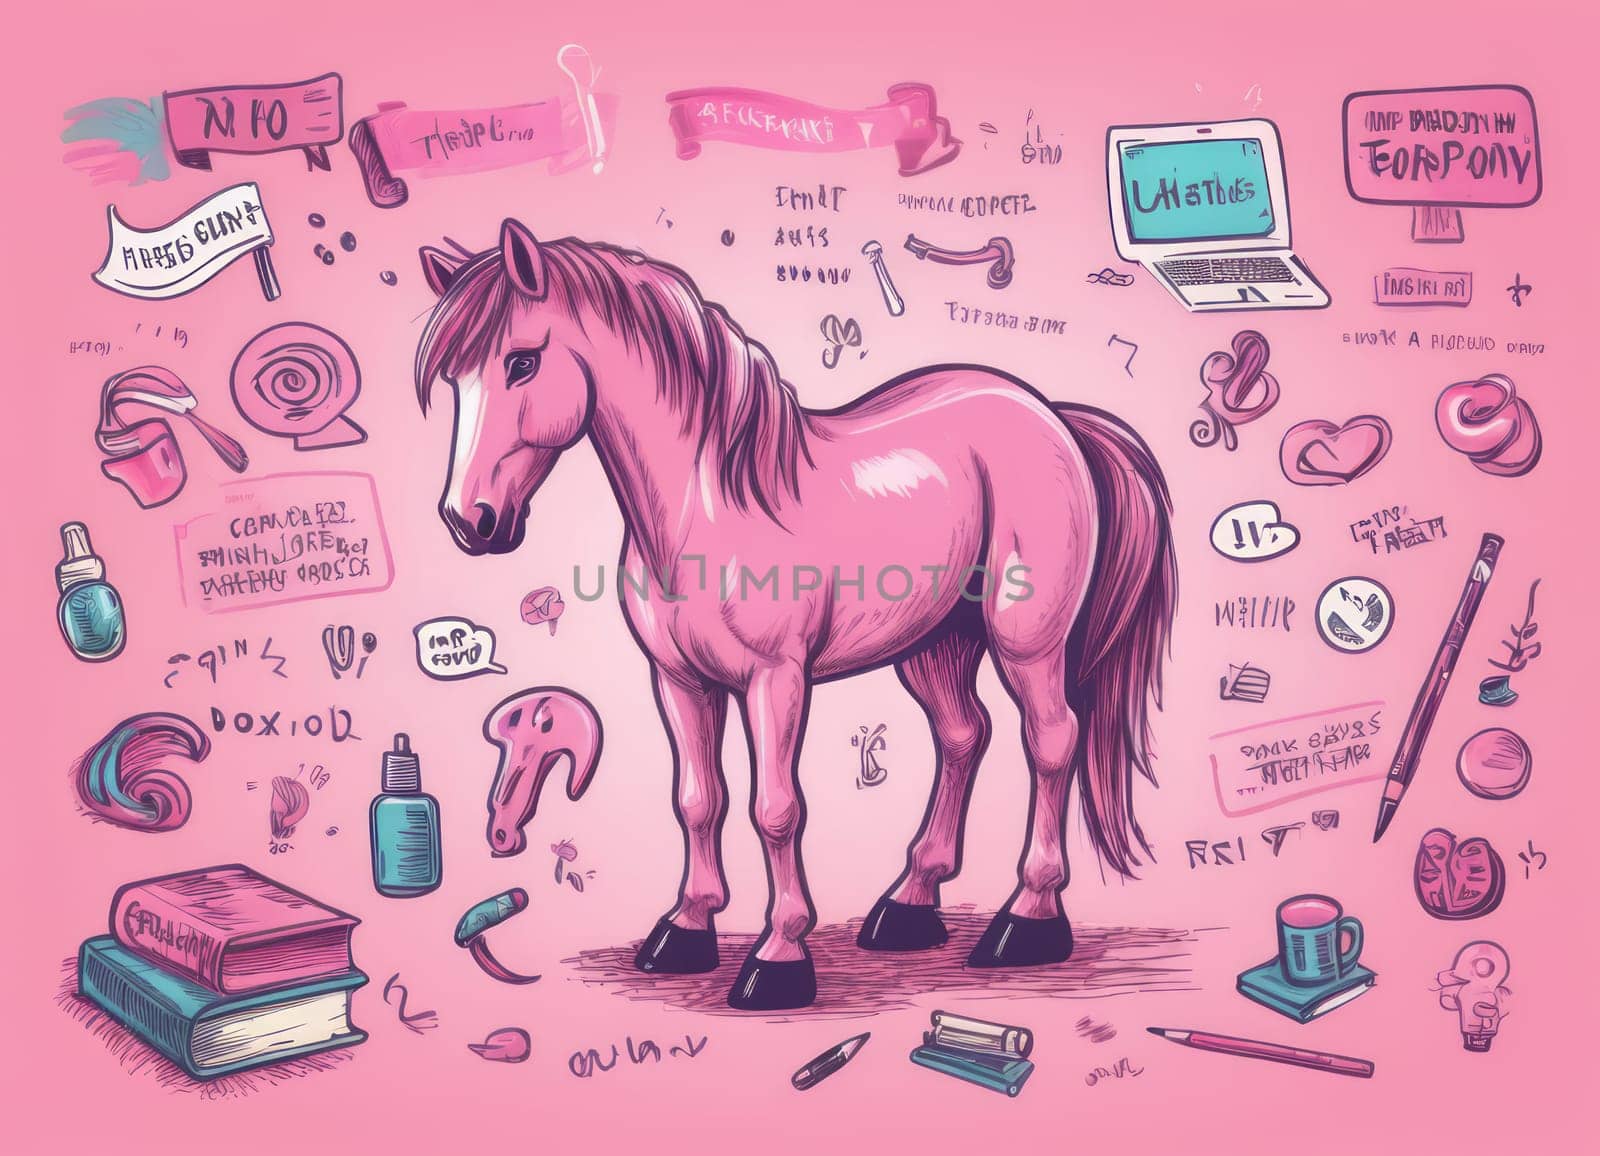 Colorful illustration of a pink horse by Andre1ns